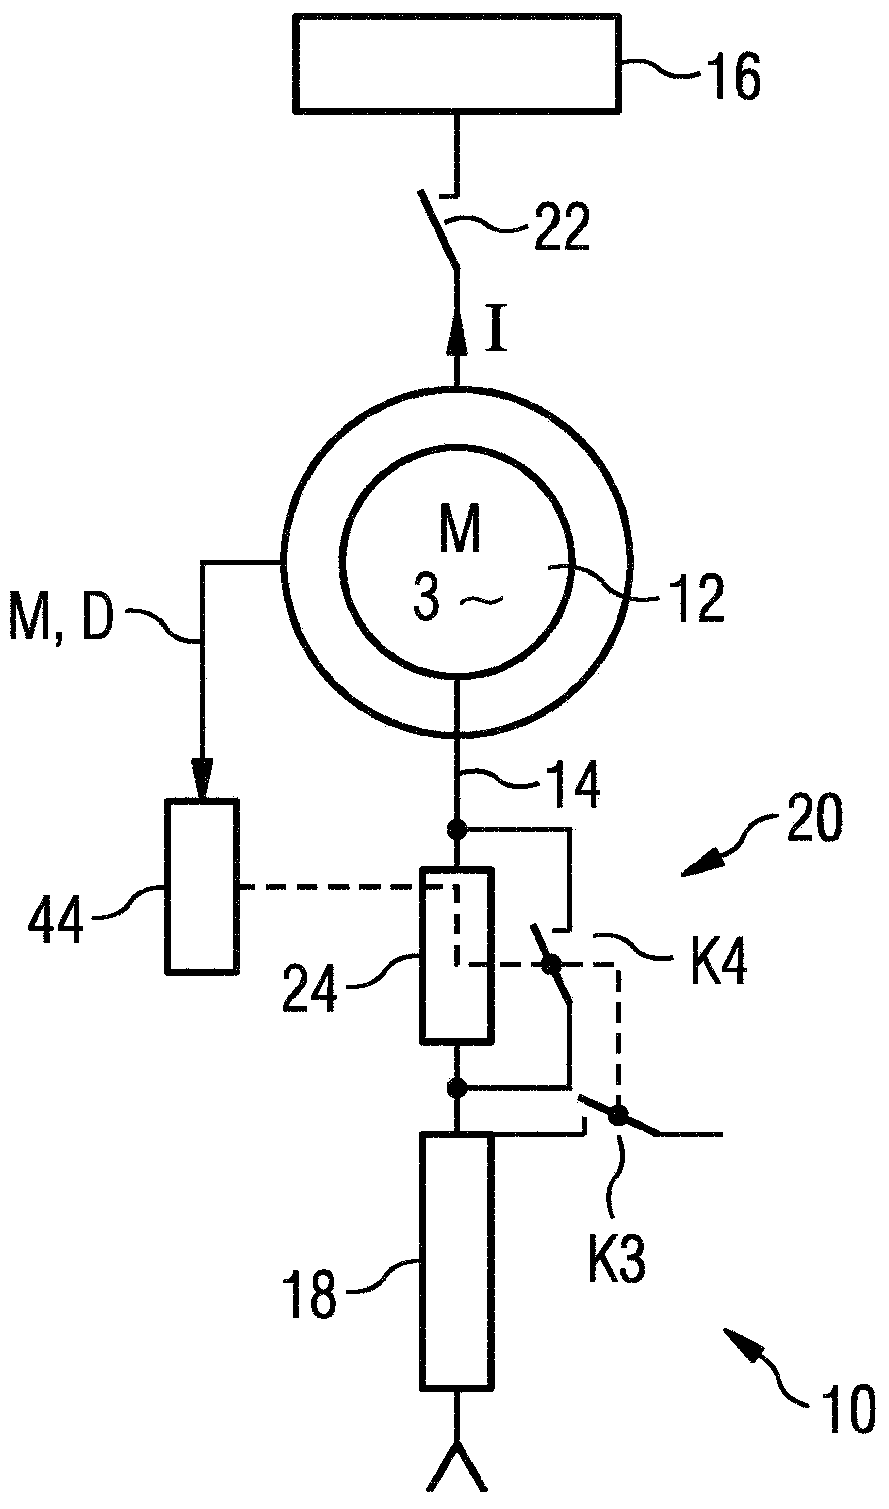 Drive system for a ball mill and method for operating a ball mill